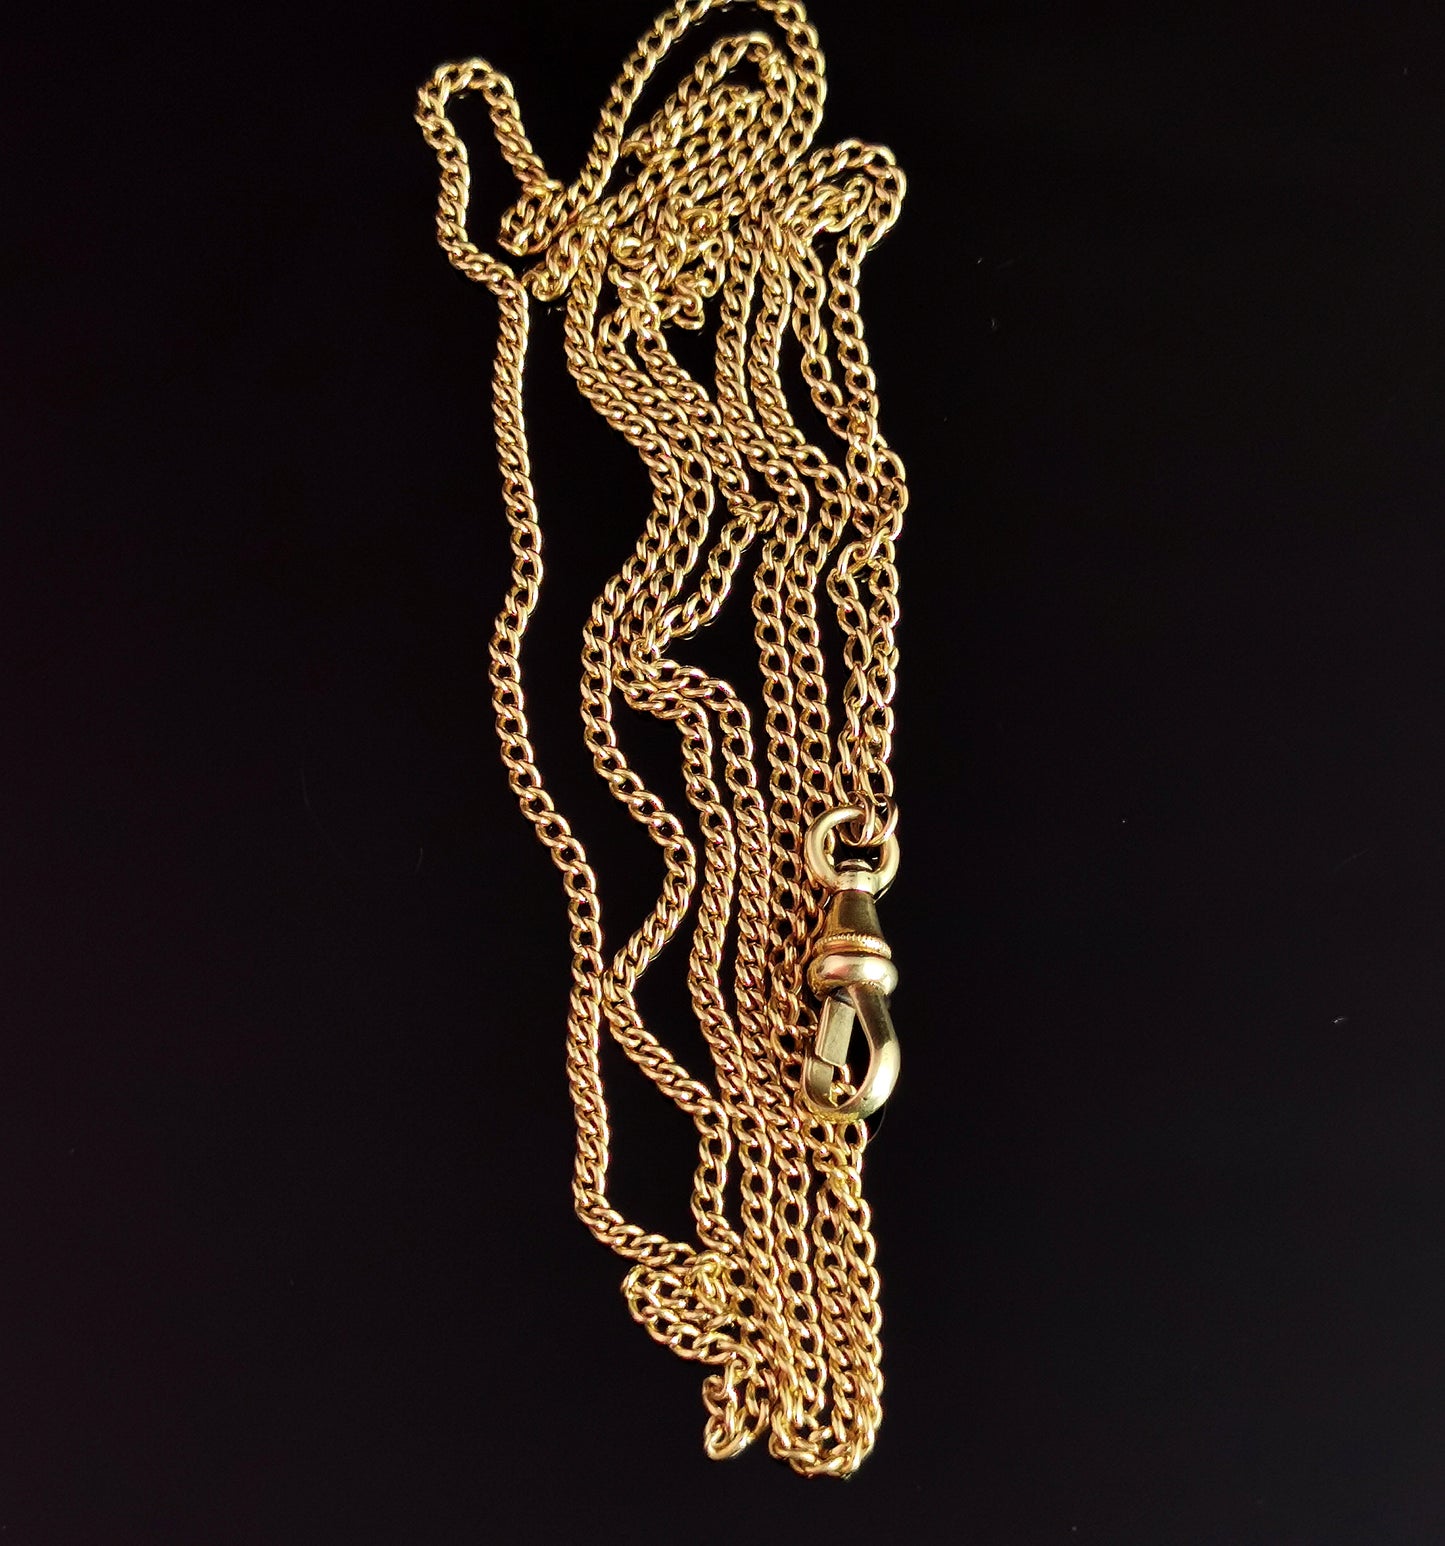 Antique 18ct yellow gold longuard chain necklace, Victorian